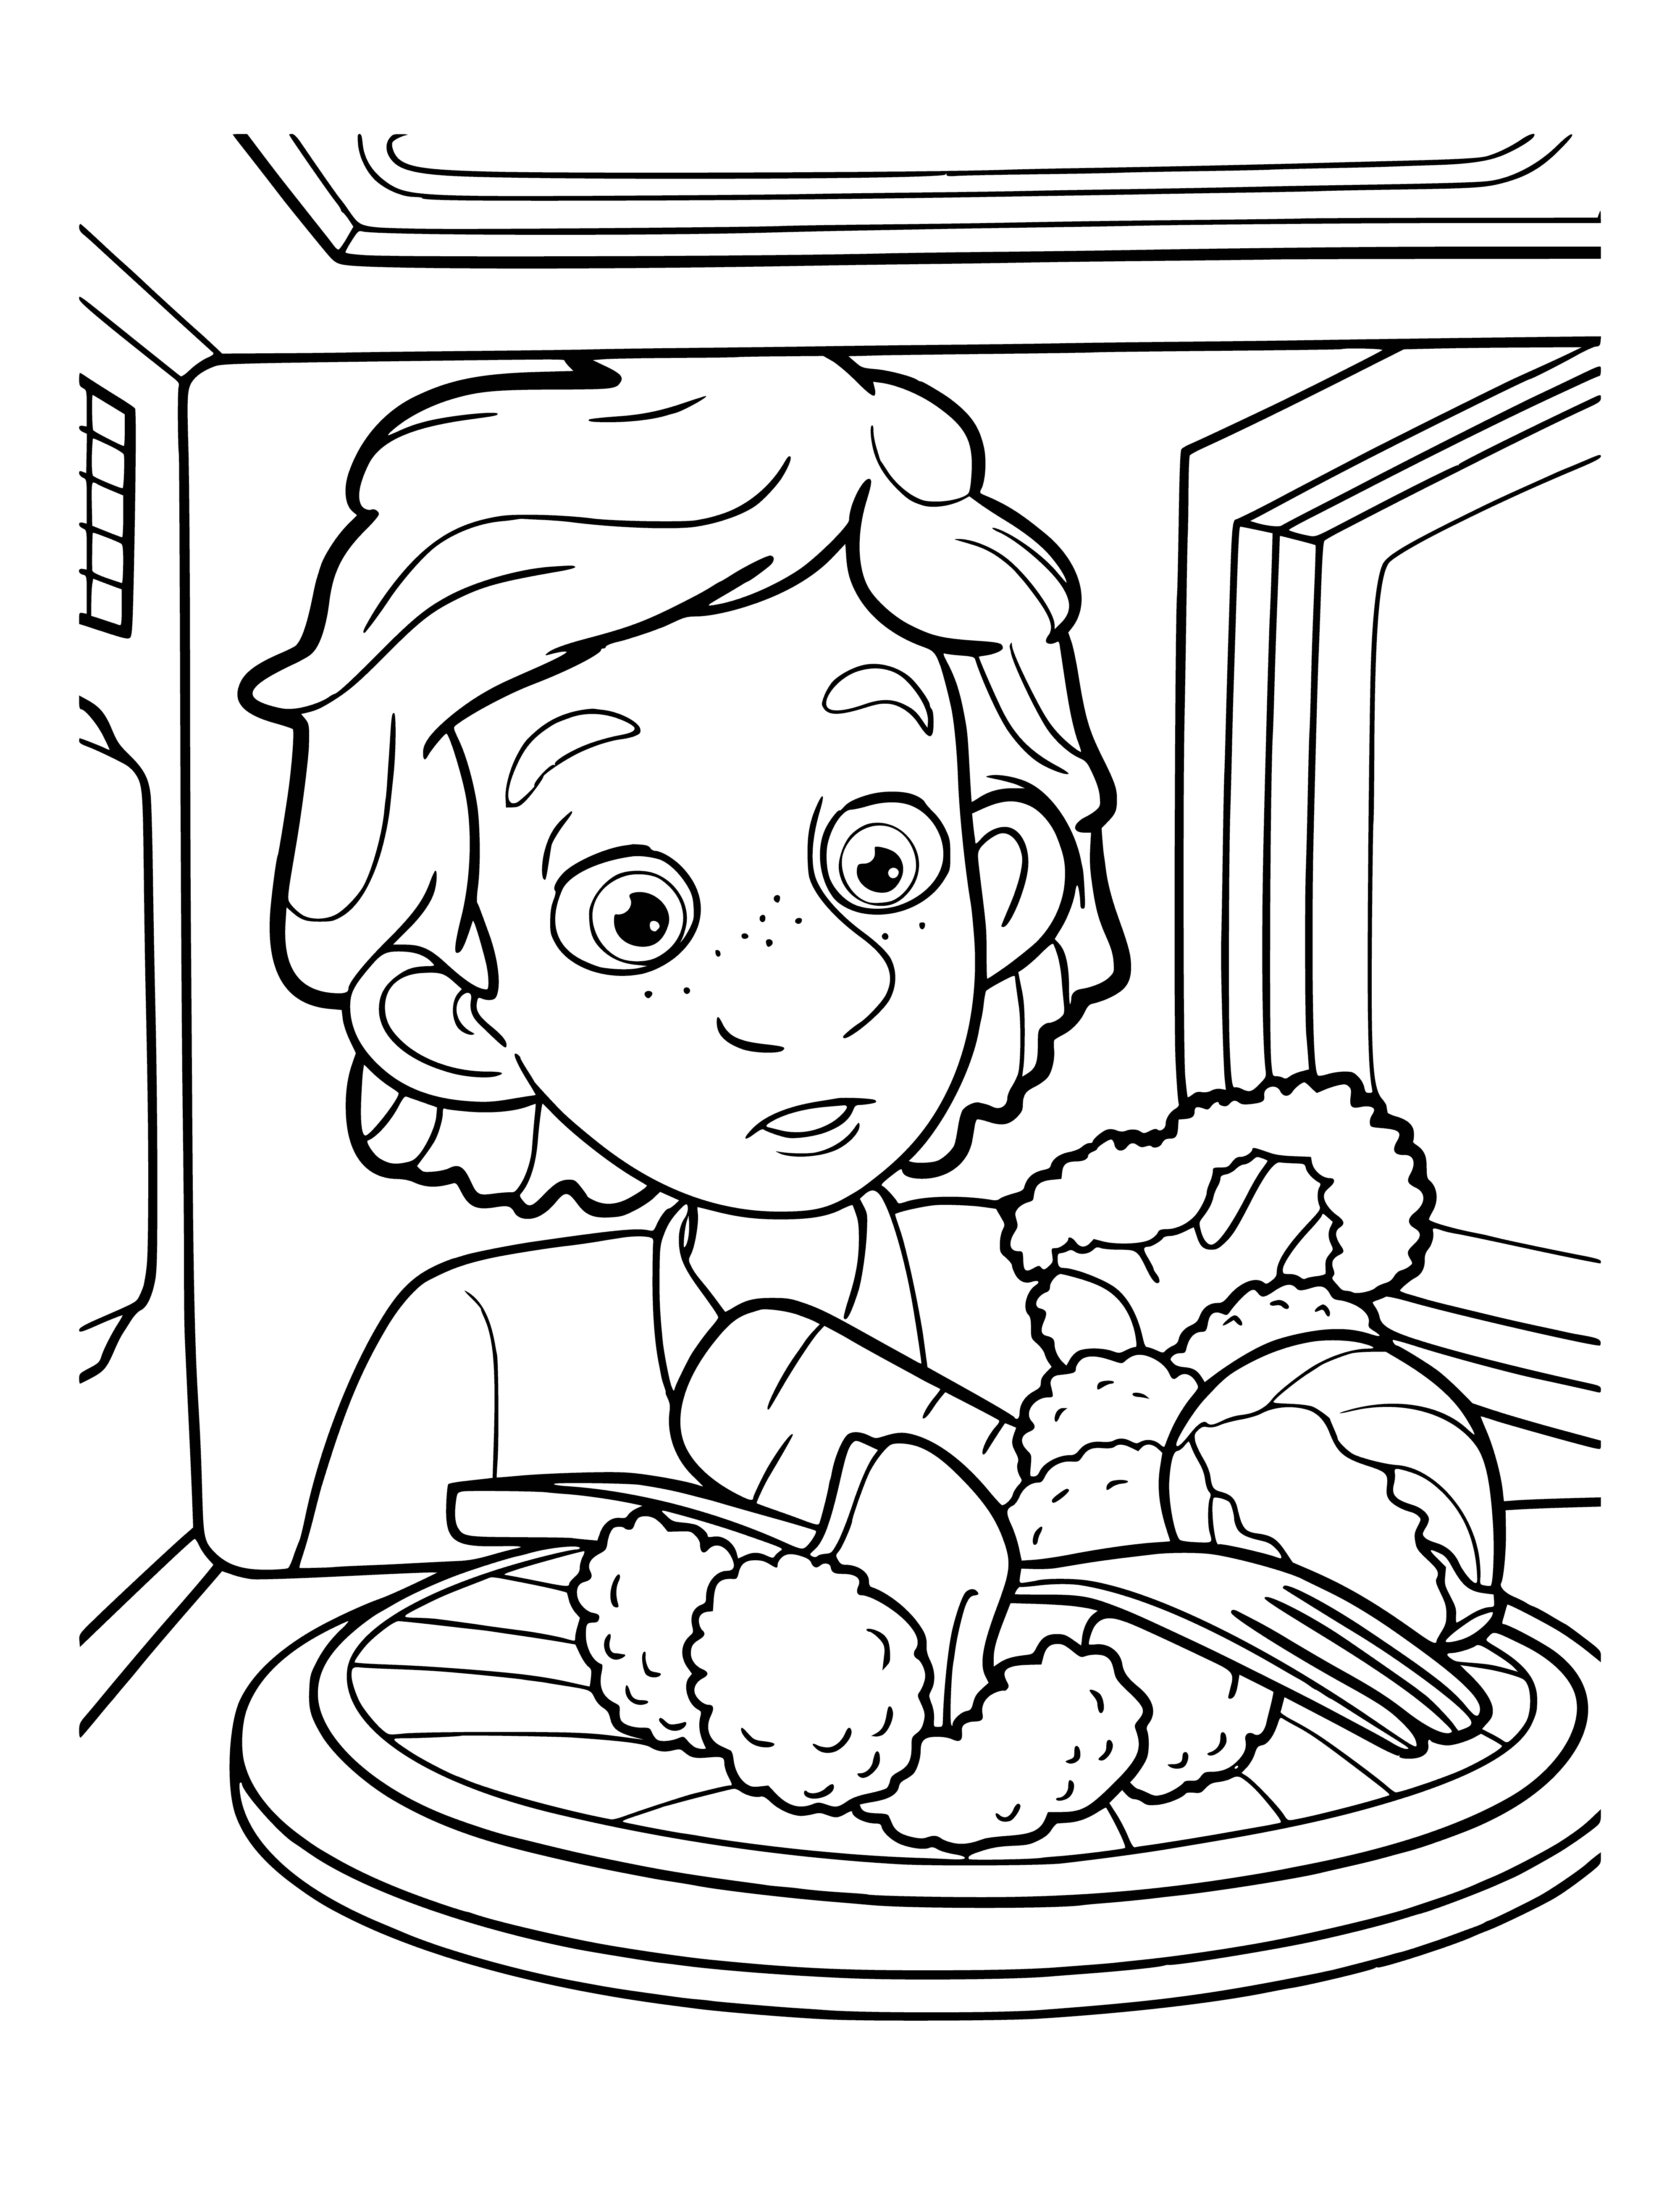 coloring page: Fixie stands on a stool with a cup and hammer, wearing a blue shirt and yellow bandana, looking at a microwave.